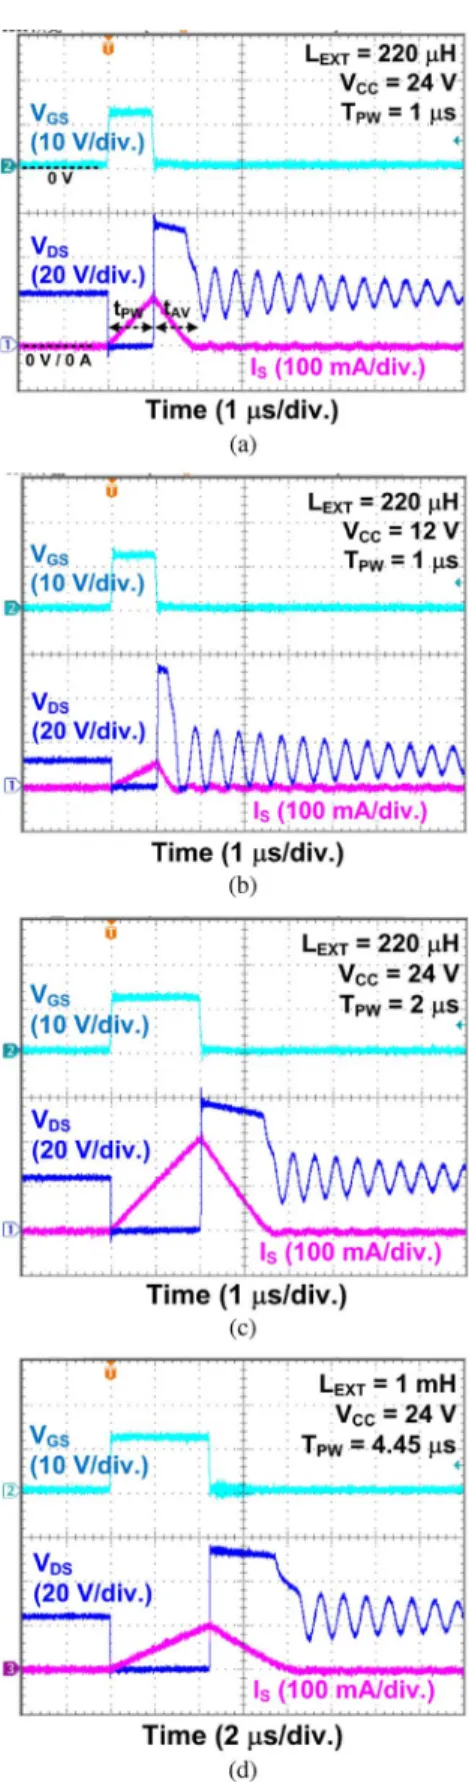 Fig. 10. Measured UIS waveforms with different L EXT , V CC , or T PW